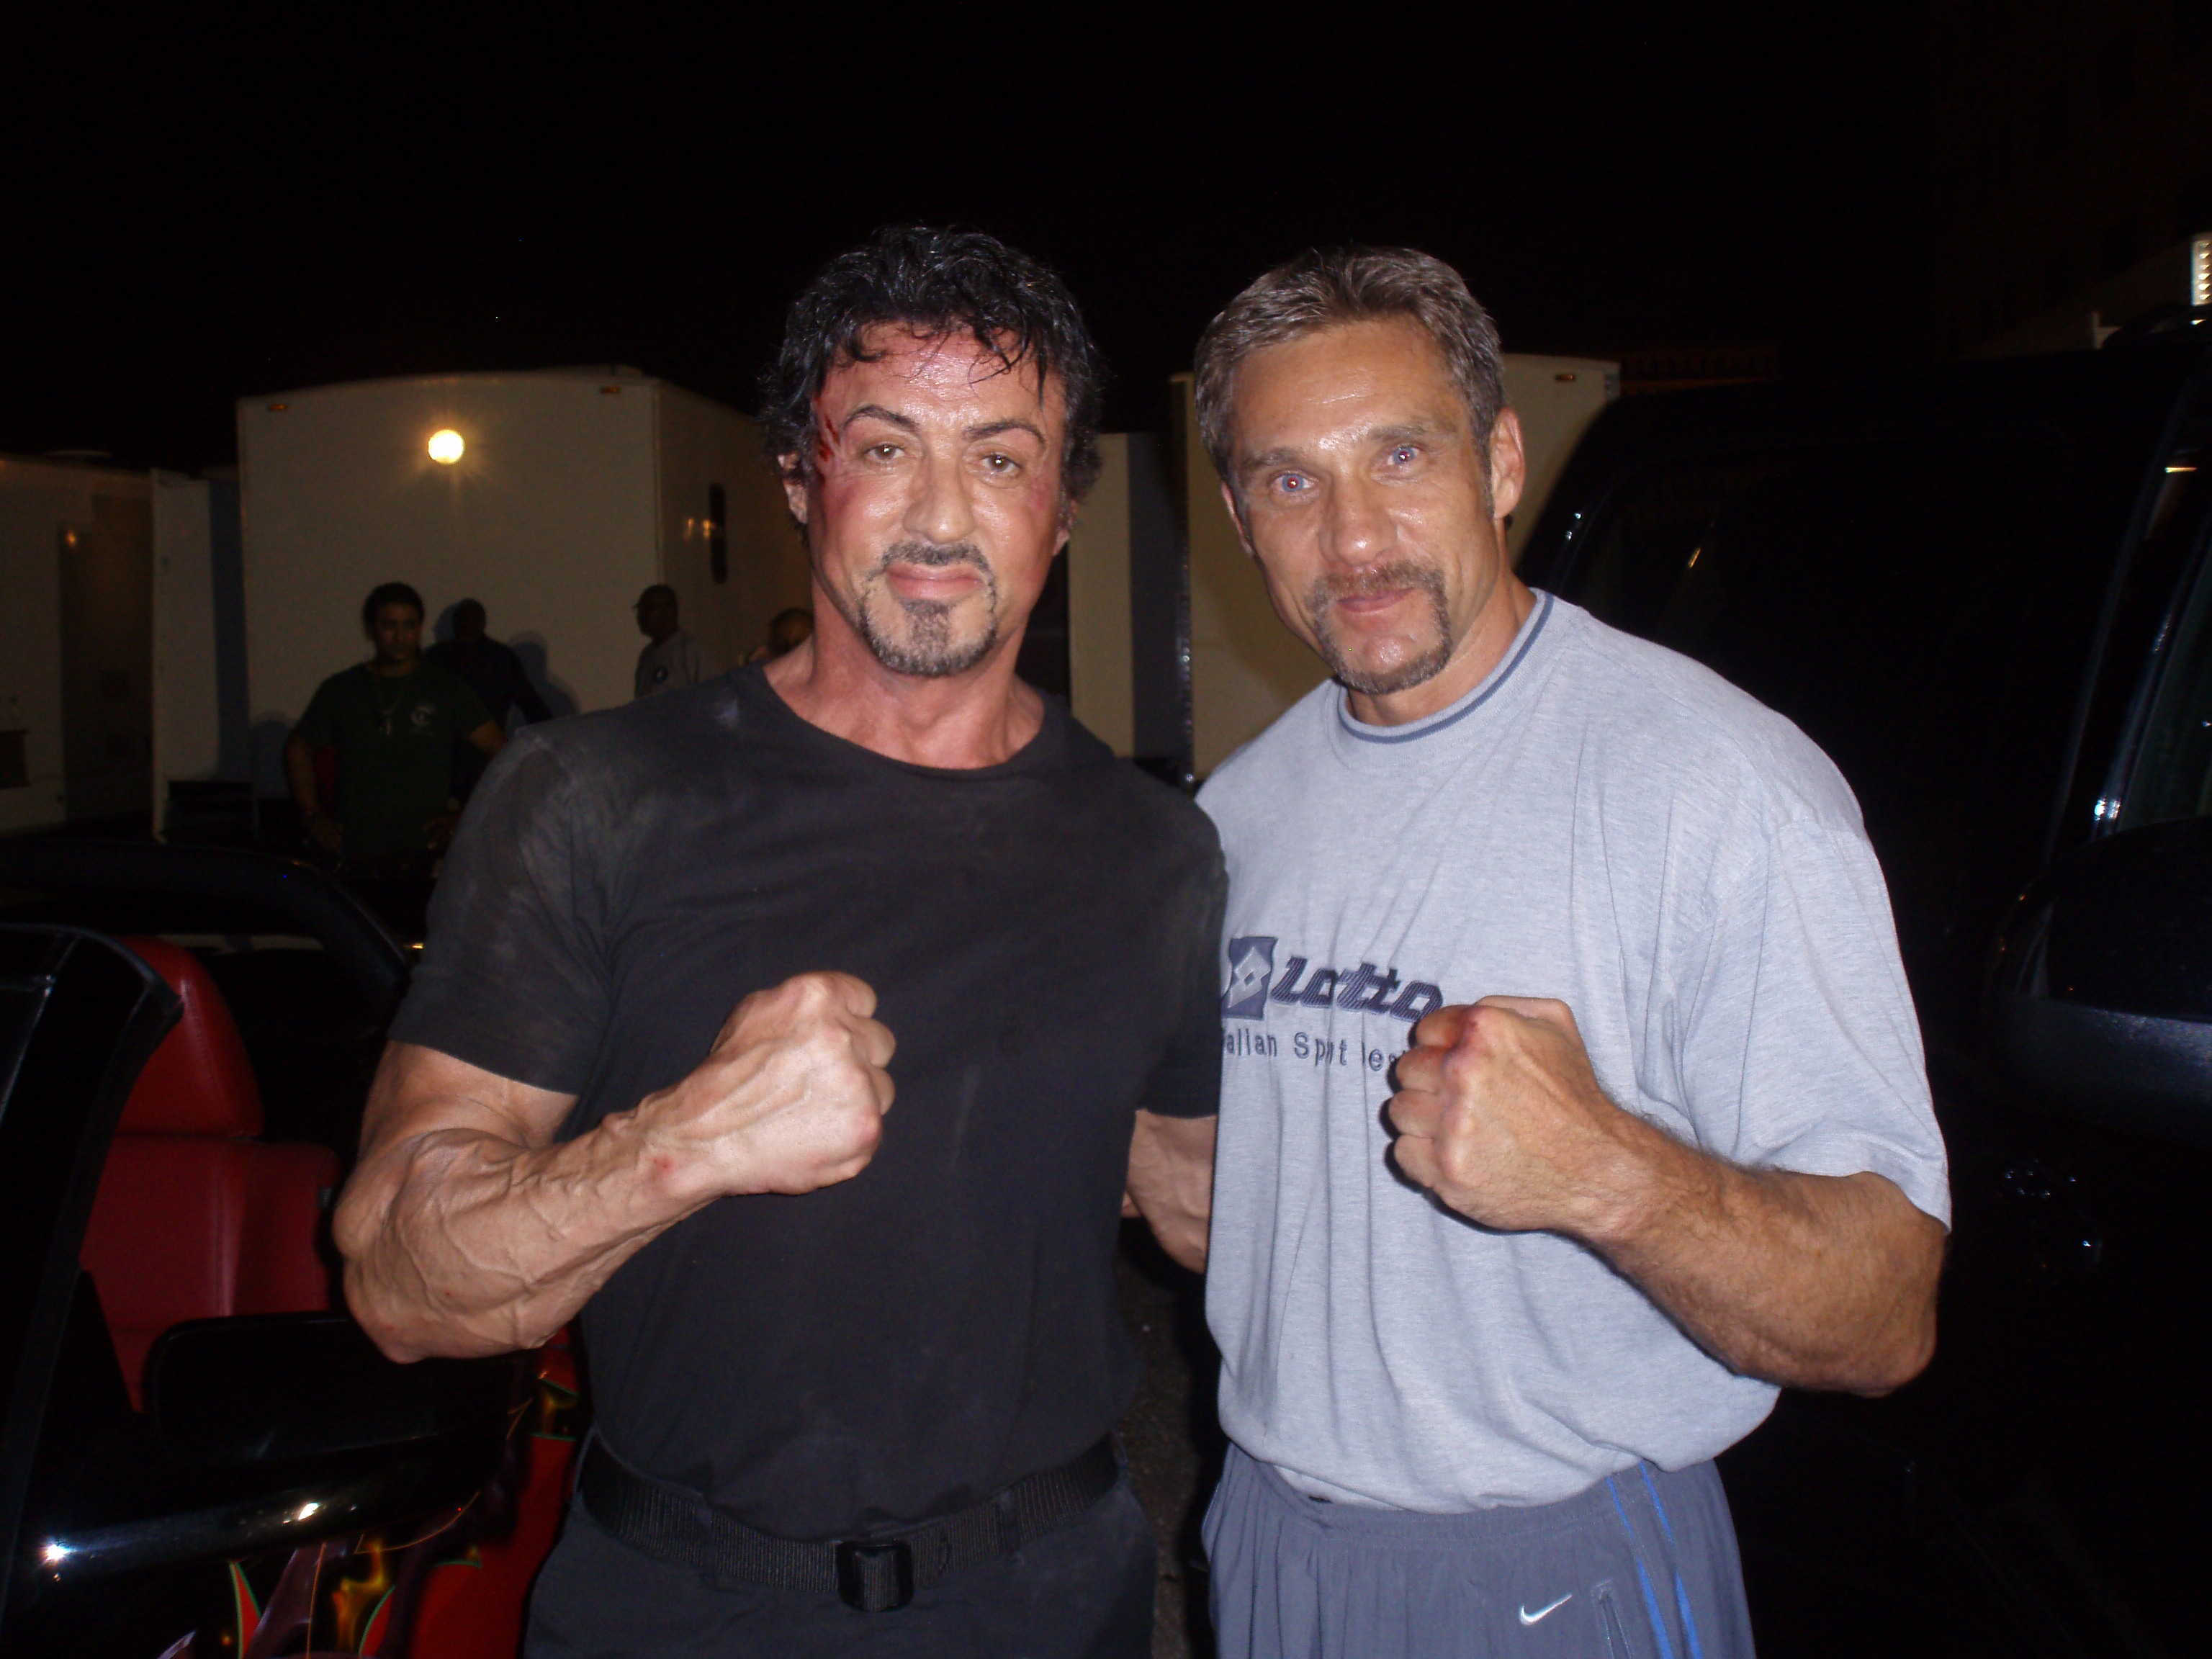 W/Sylvester Stallone on location for 'Expendables'